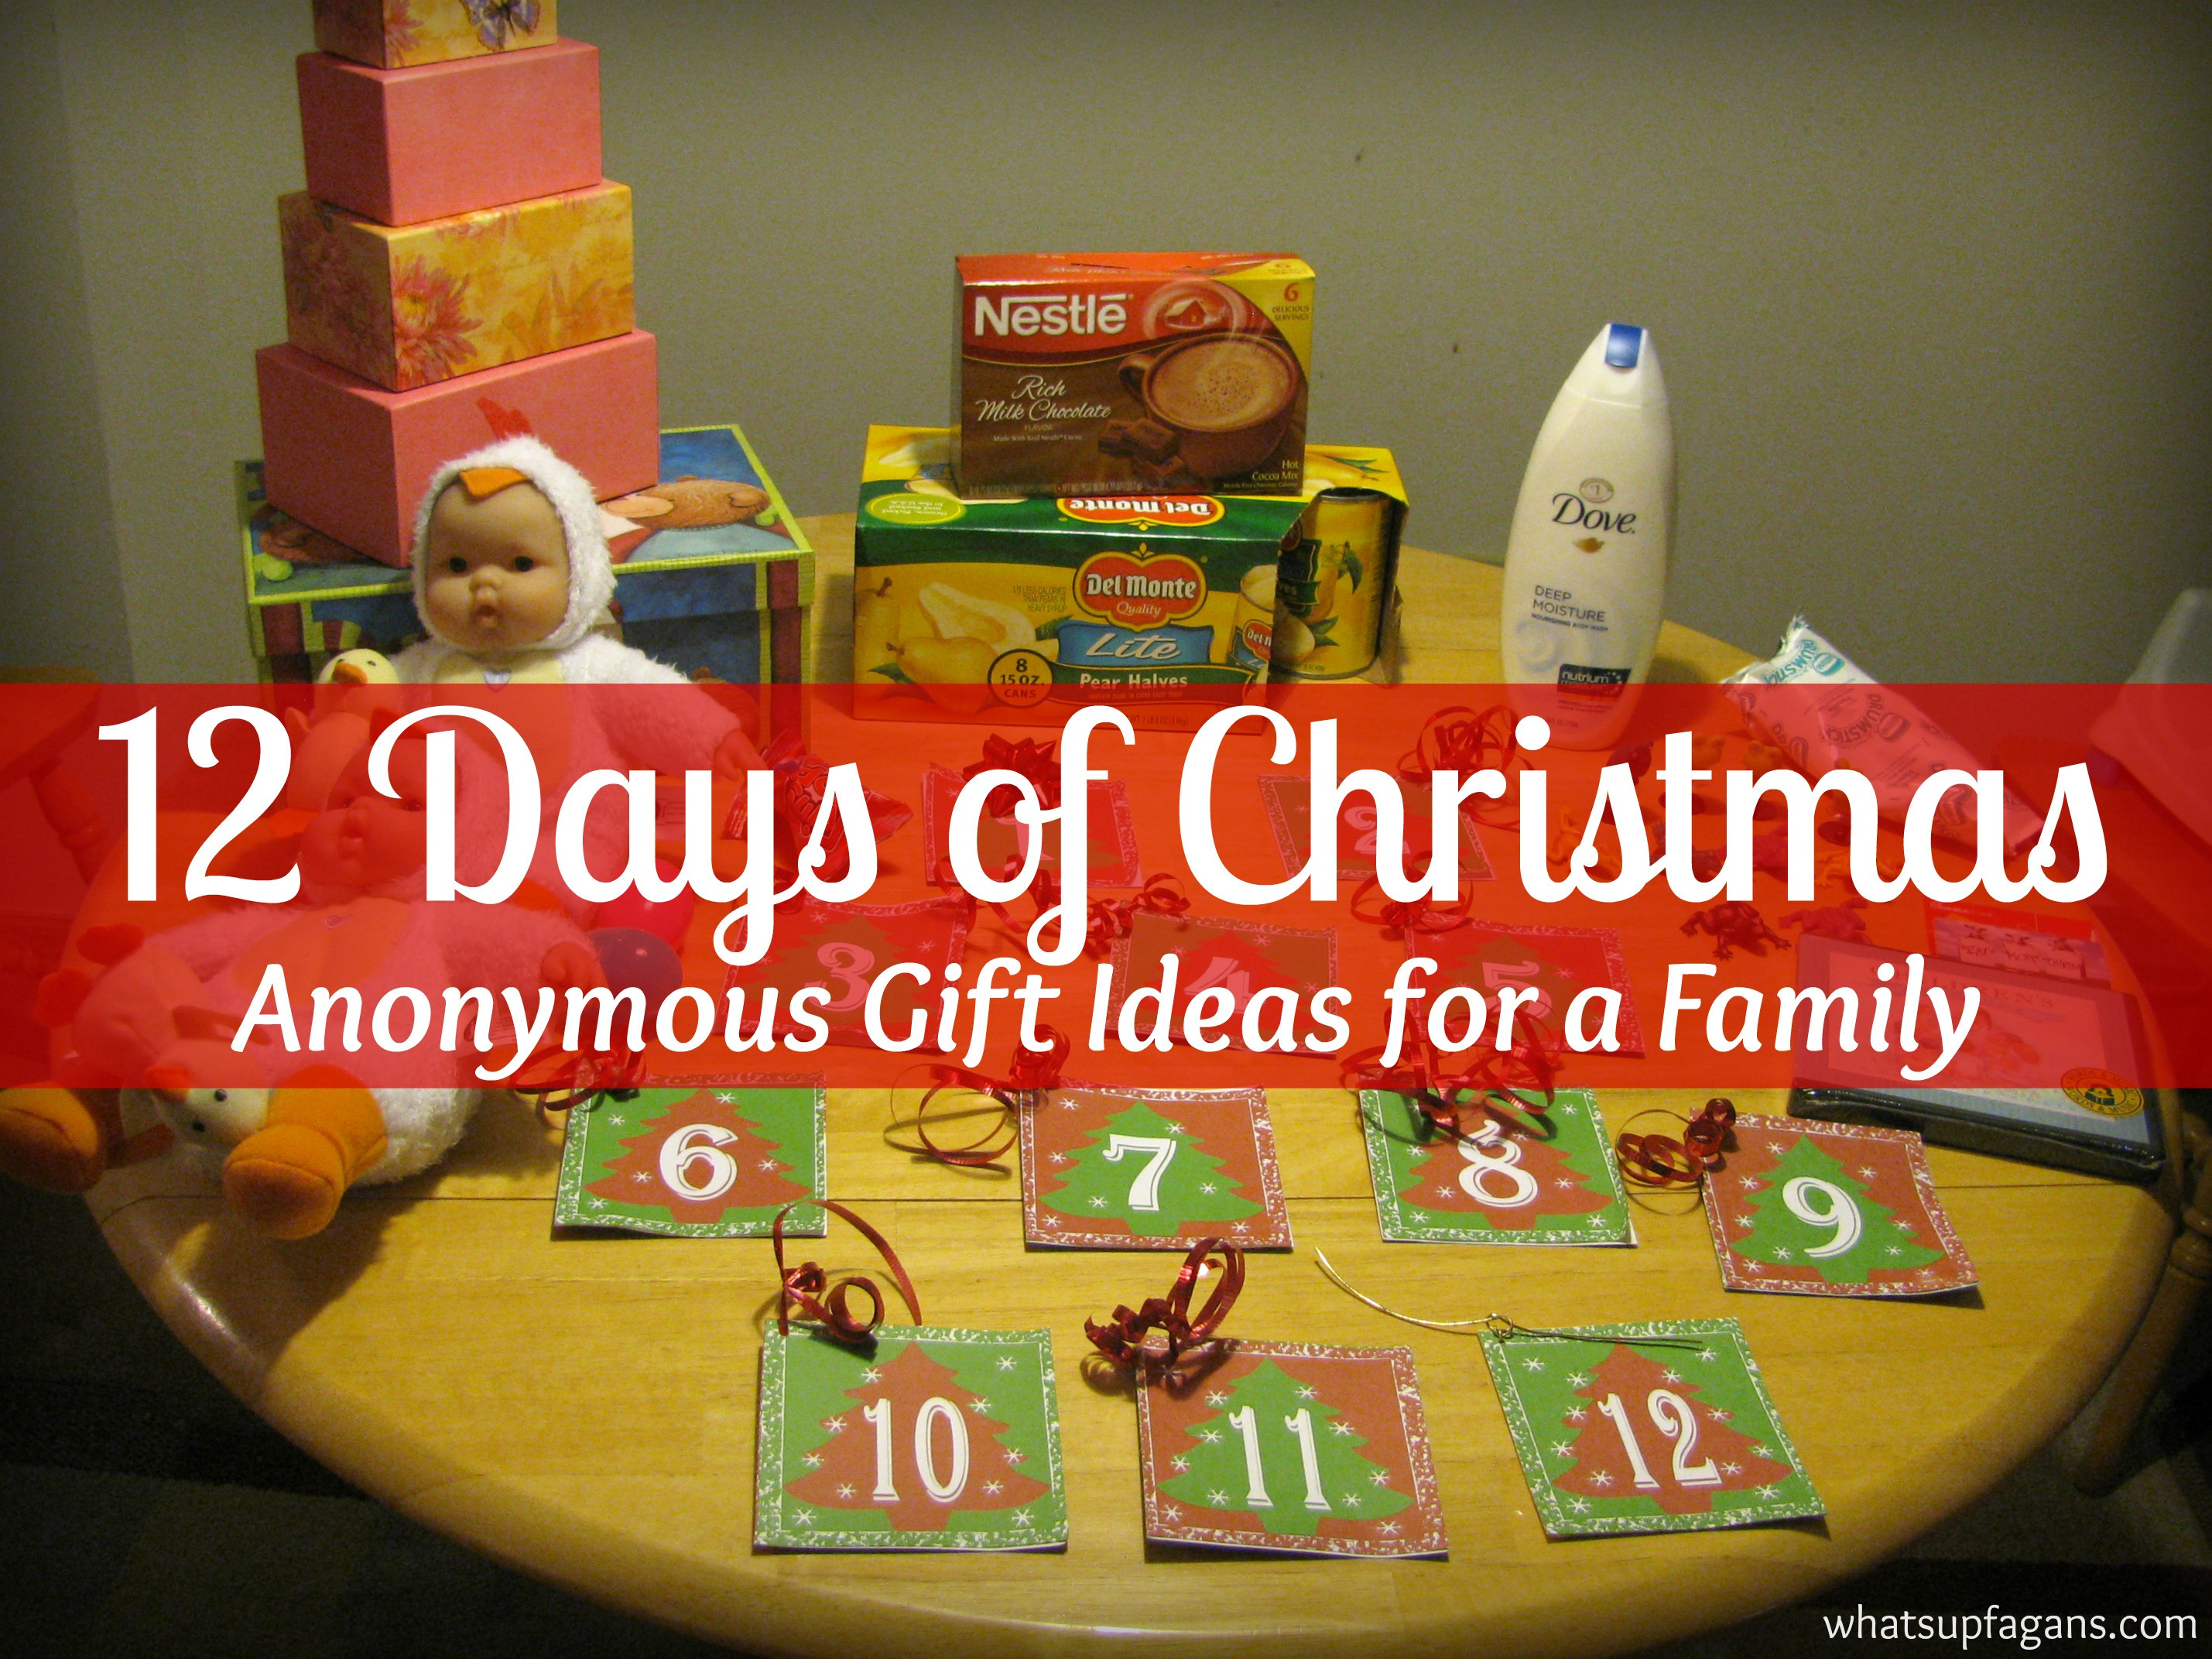 12 Days Of Christmas Gift Ideas For Kids
 How to Assemble Blessing Bags for Homeless People as a Group